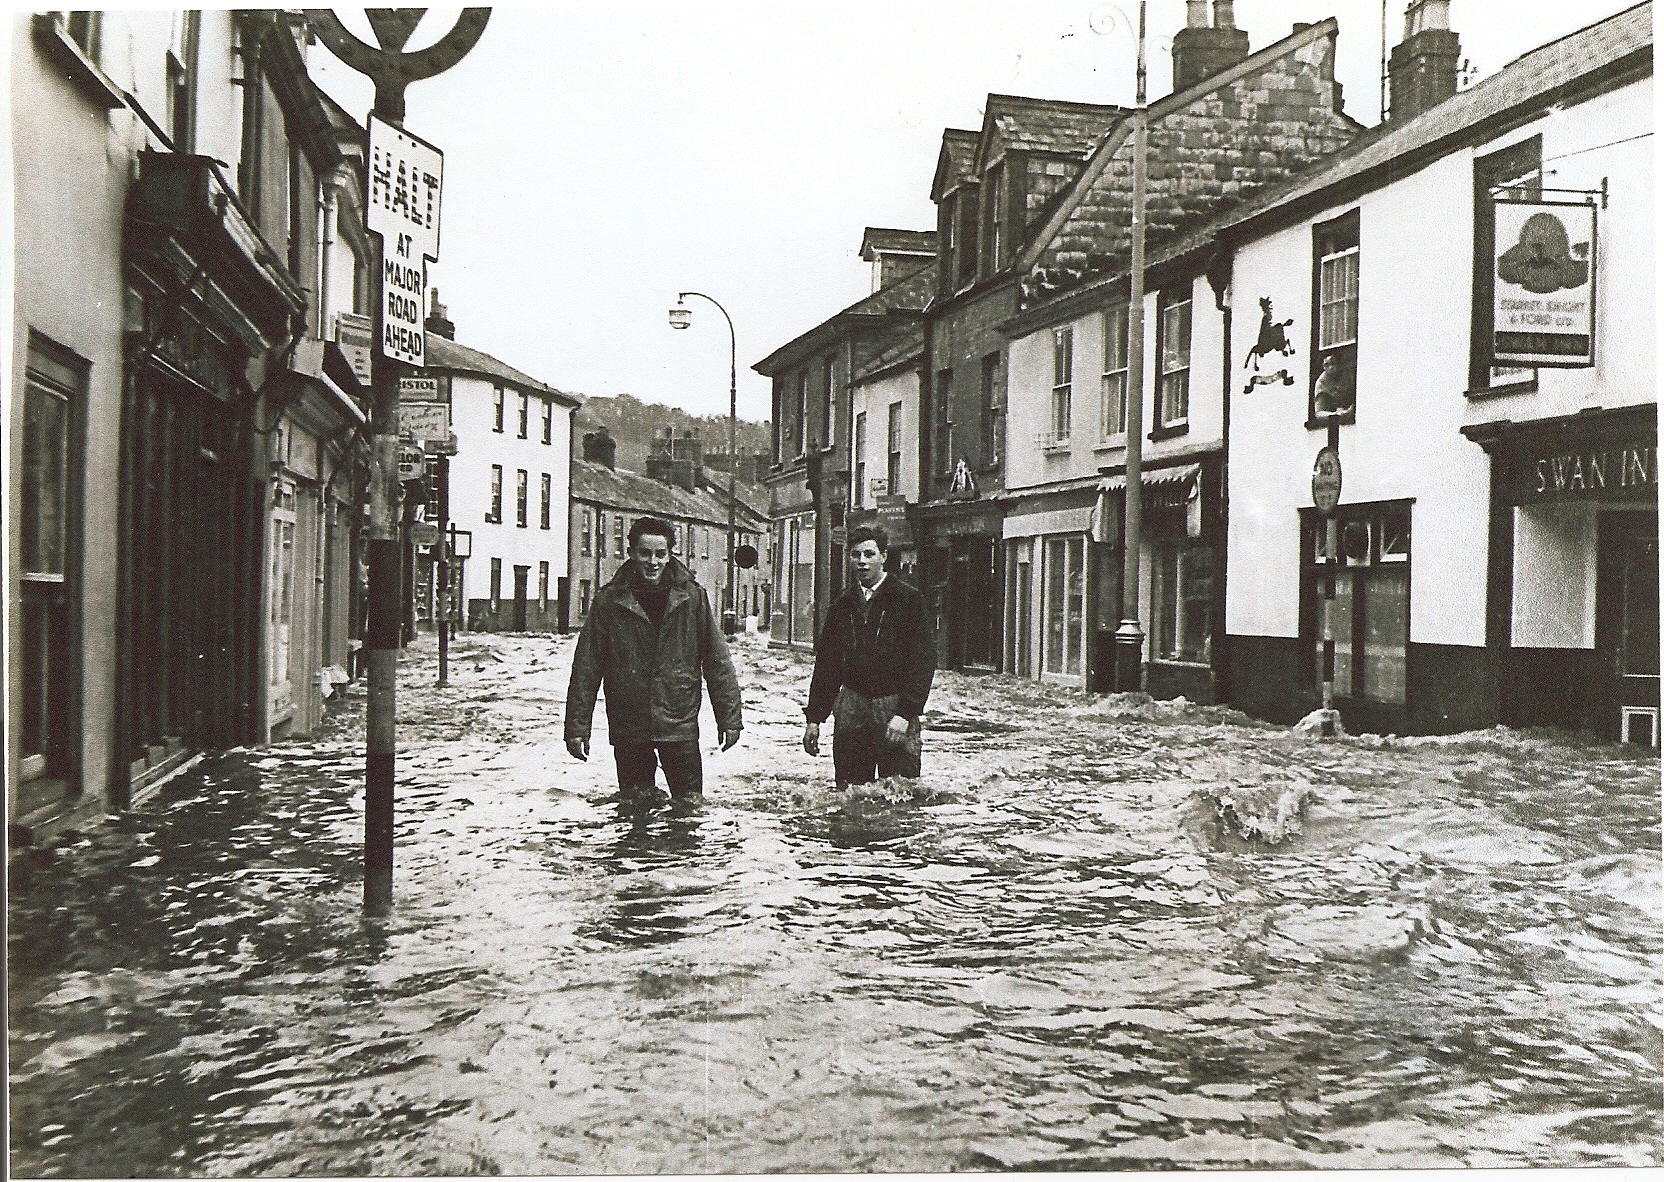 A black and white photo dating from 1960. A flooded street with a pub, the Swan Inn, on the right and building either side. There are two men standing in the middle of the street. The flood water reaches just over their knees.